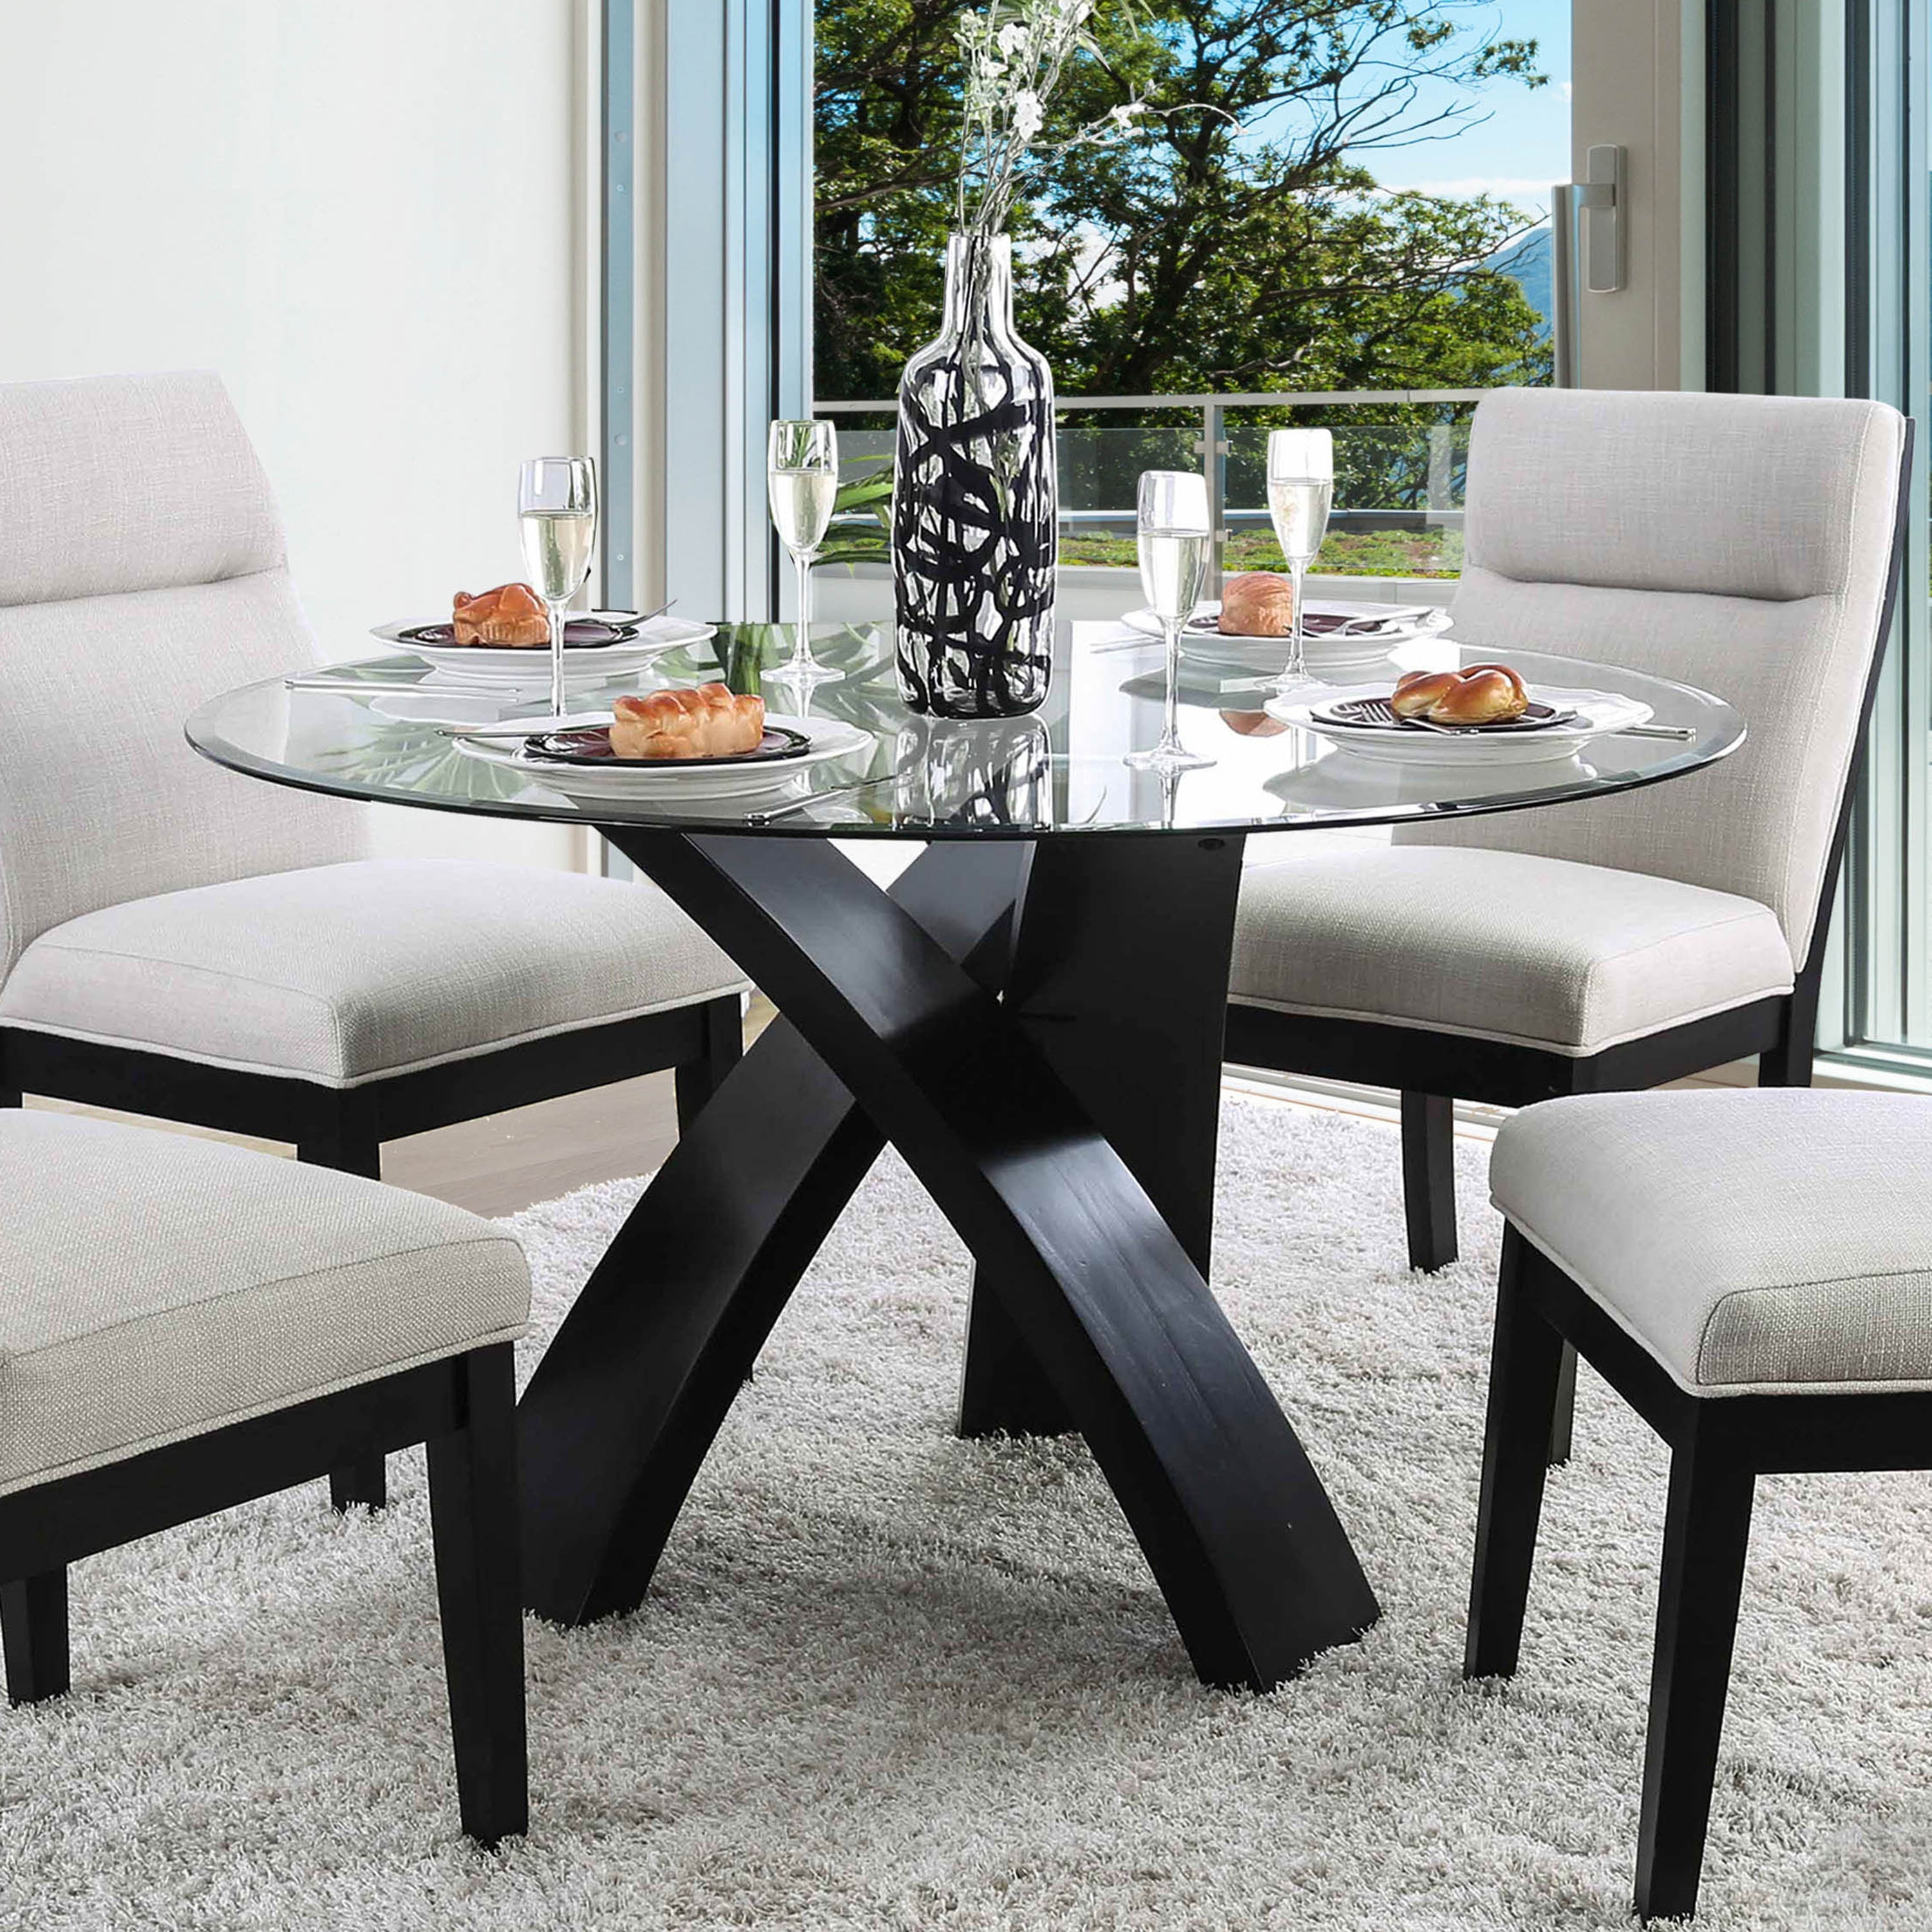 Furniture of America Evans Contemporary Round Glass Dining Table ...